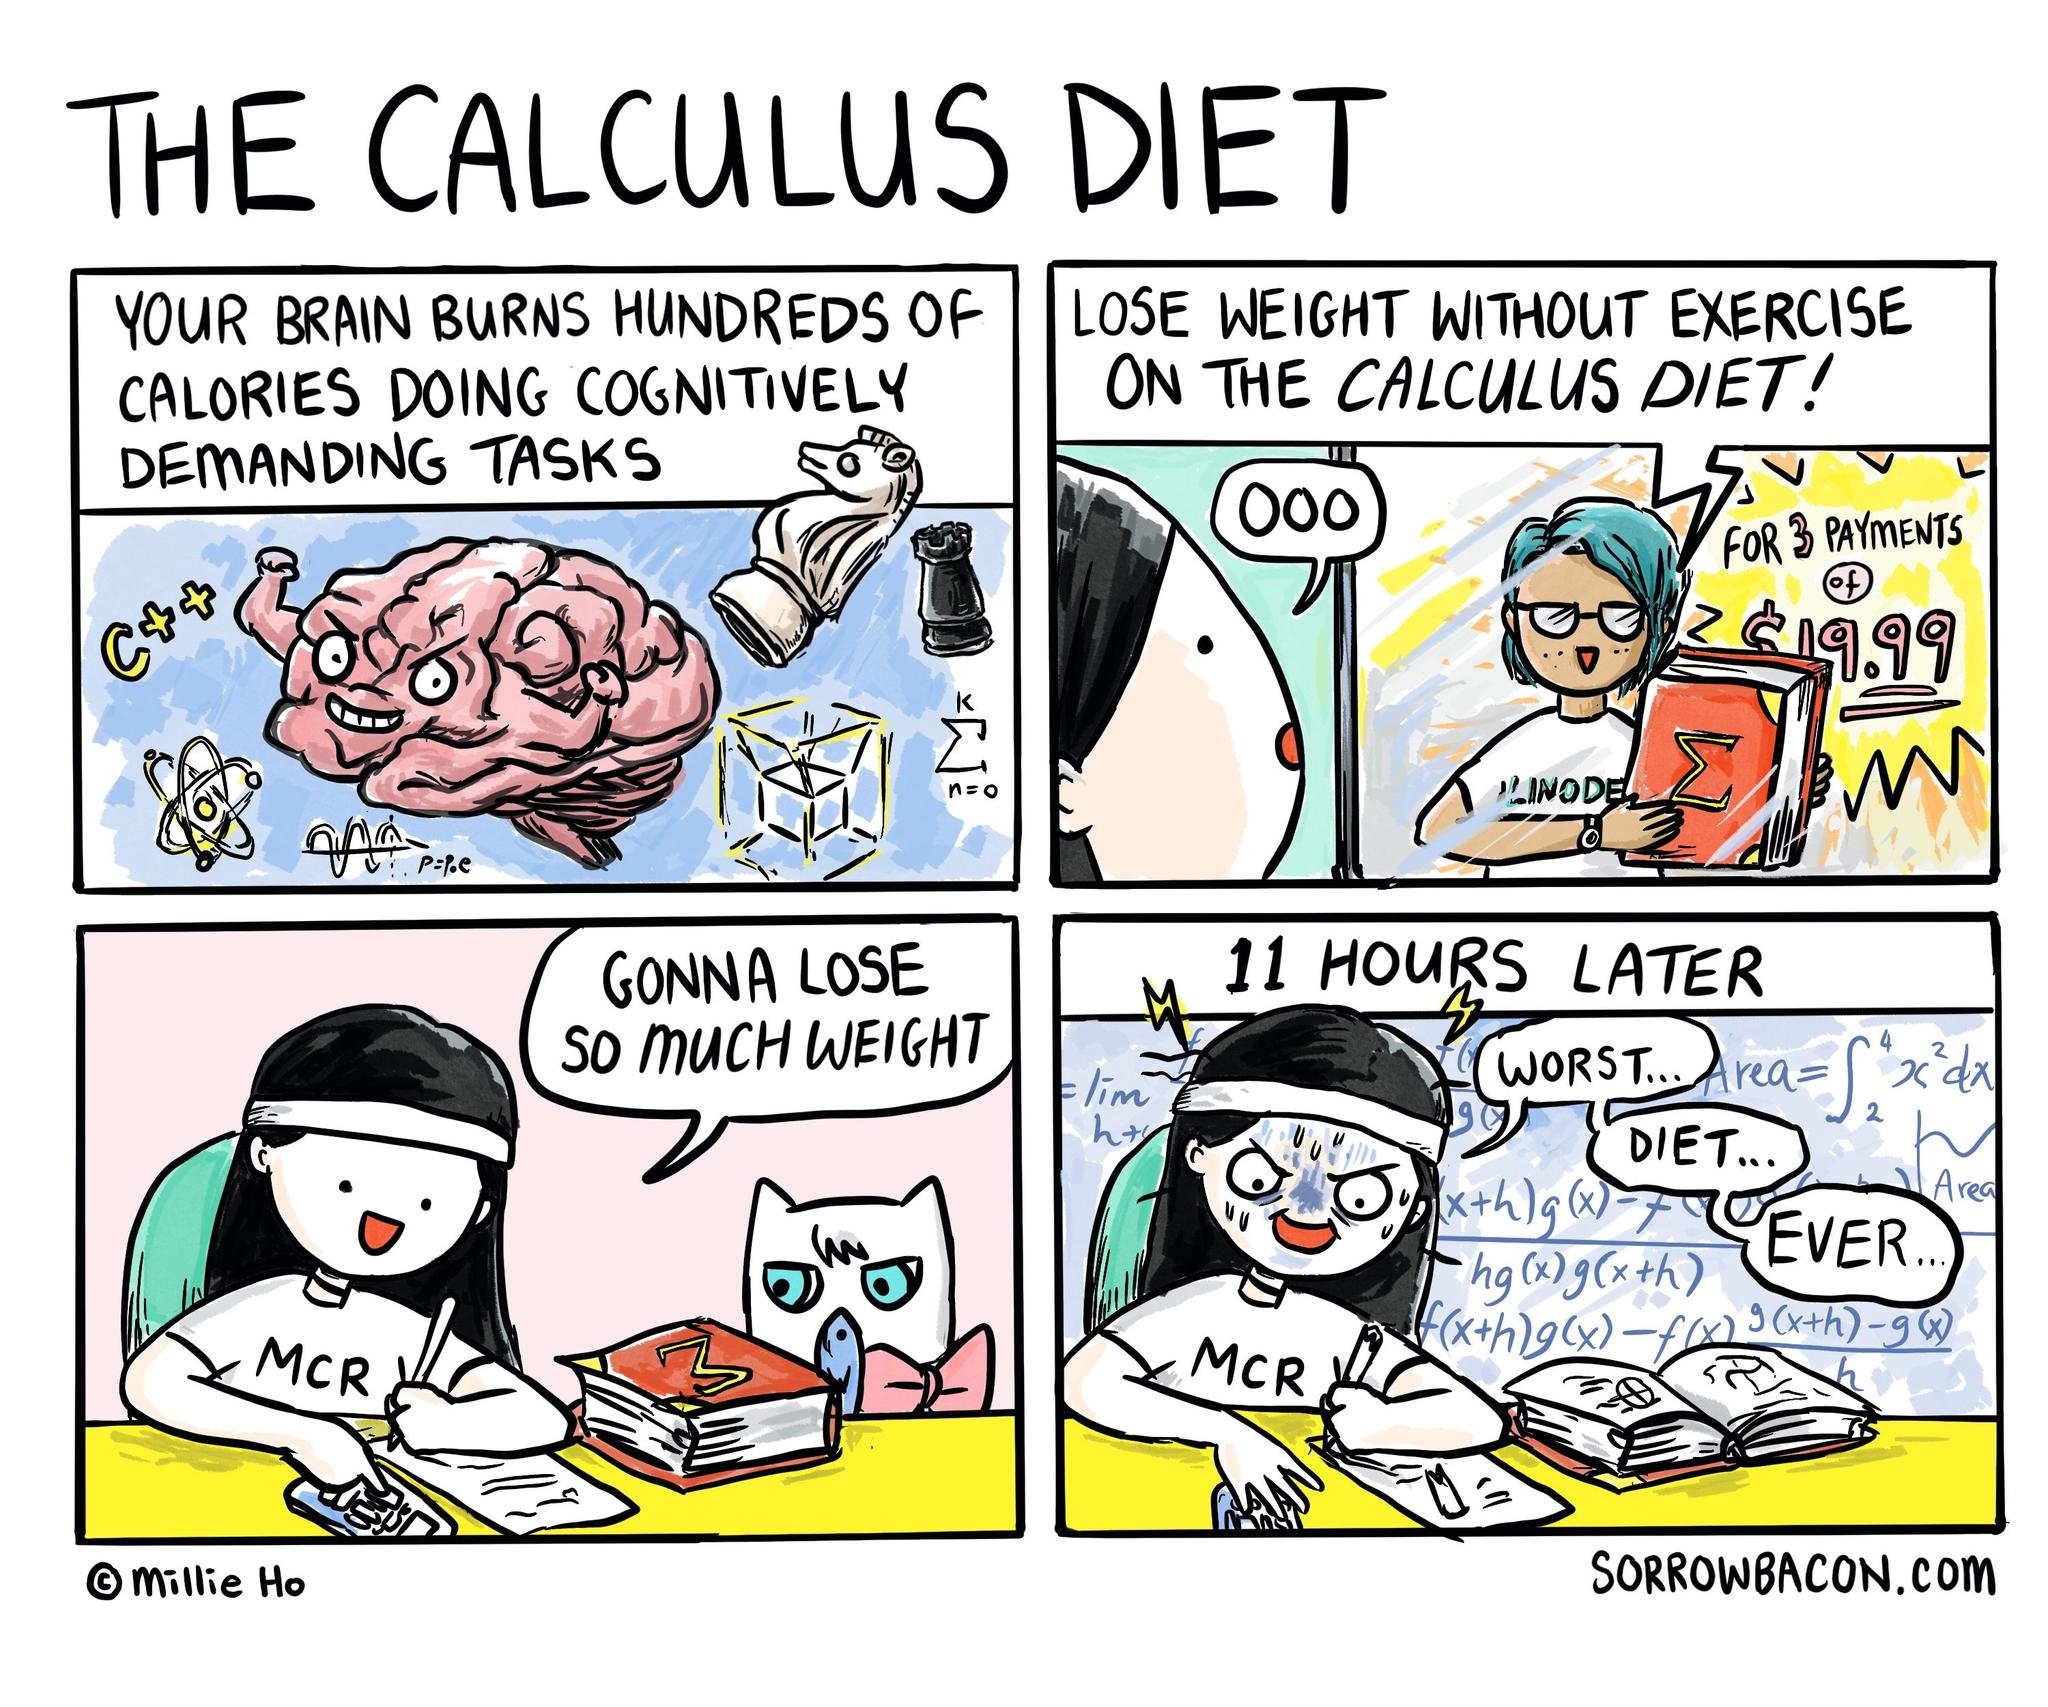 The Calculus Diet sorrowbacon comic